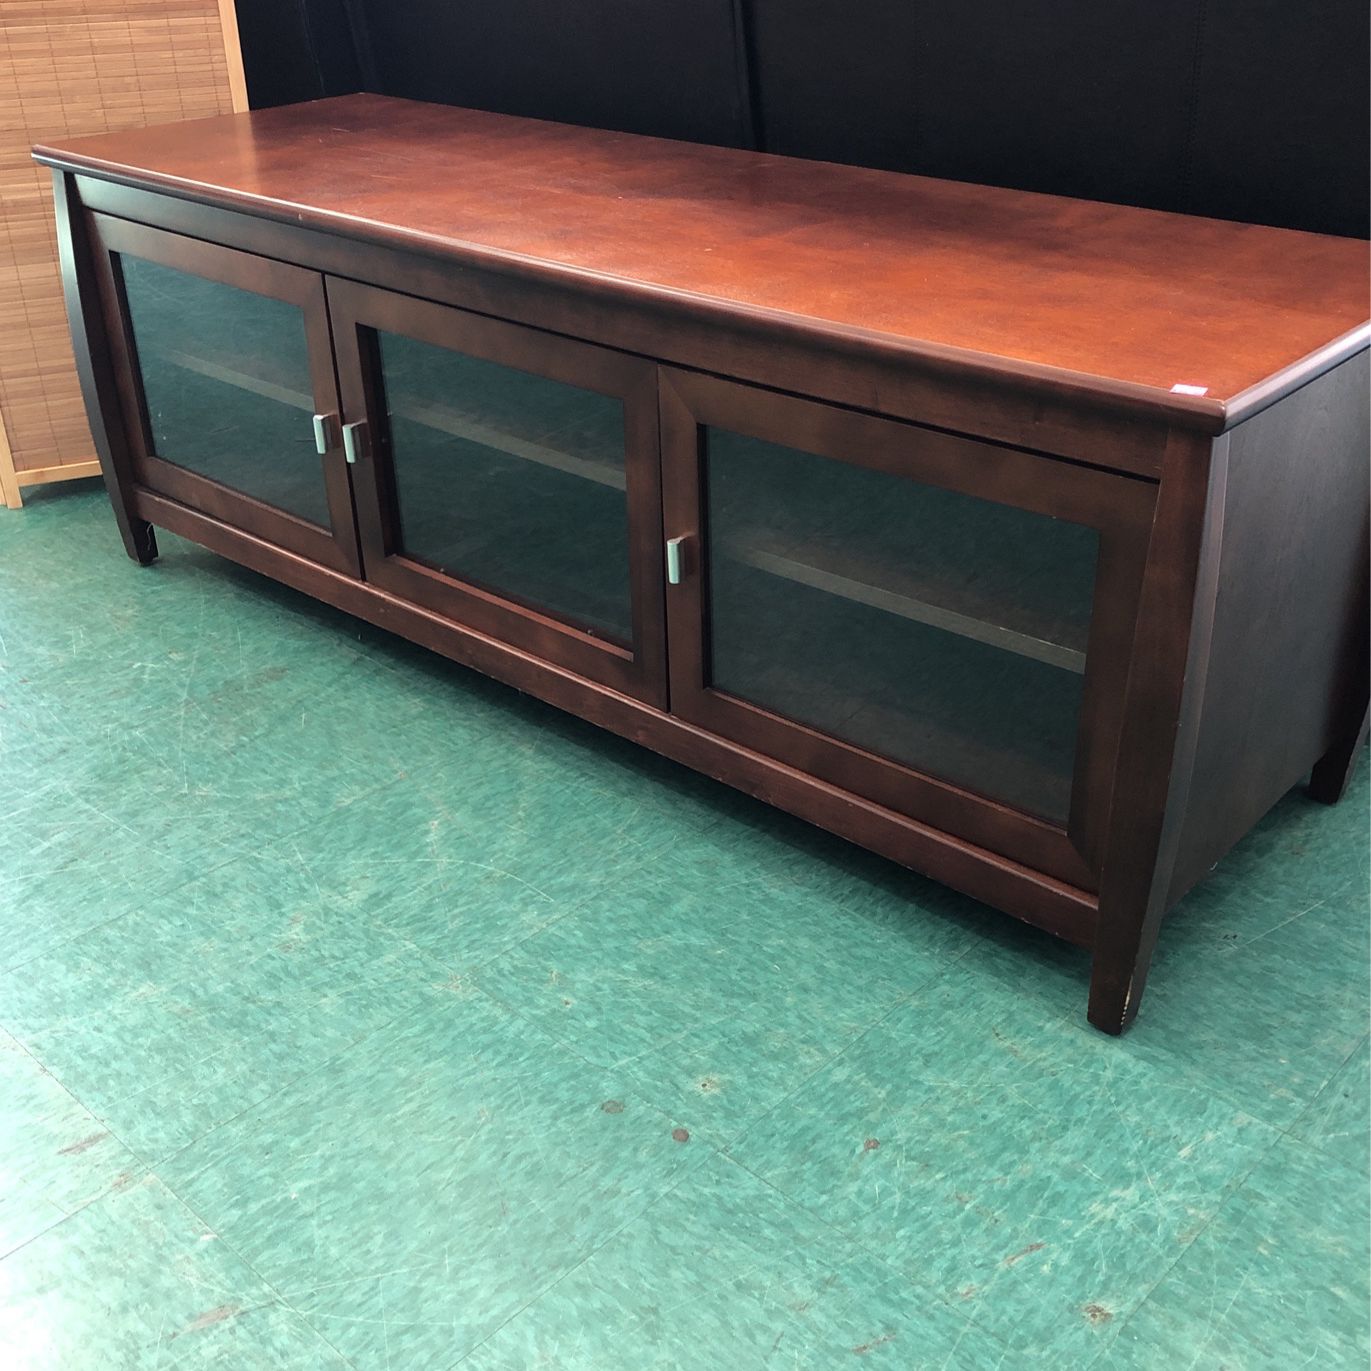 Wood Tv Stand With Glass Doors